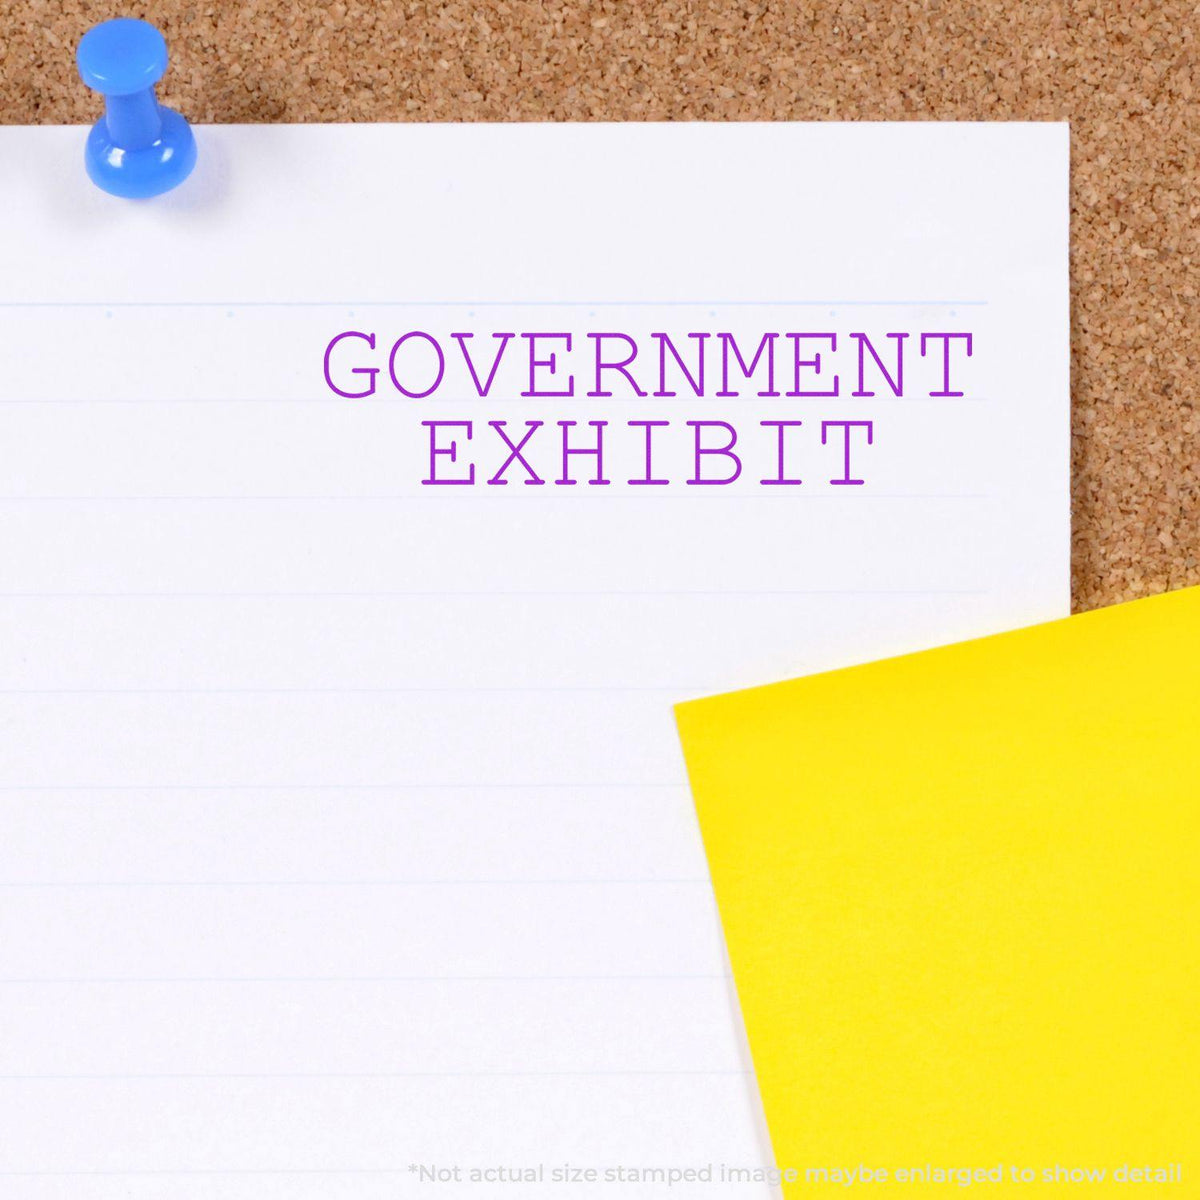 Government Exhibit Rubber Stamp In Use Photo